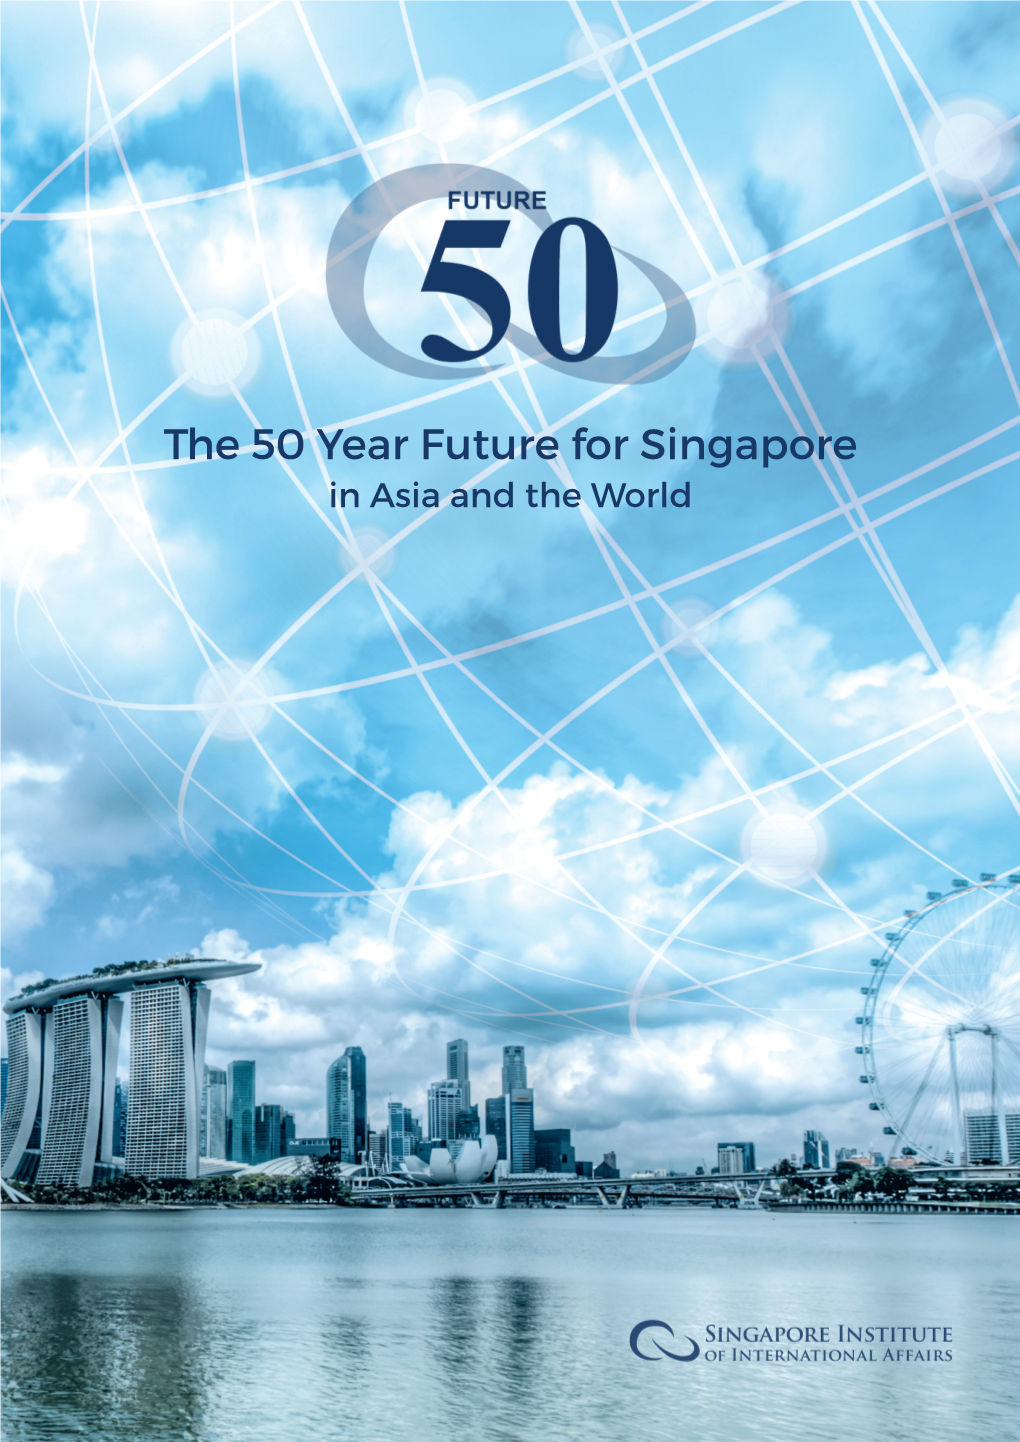 The 50 Year Future for Singapore in Asia and the World FOREWORD